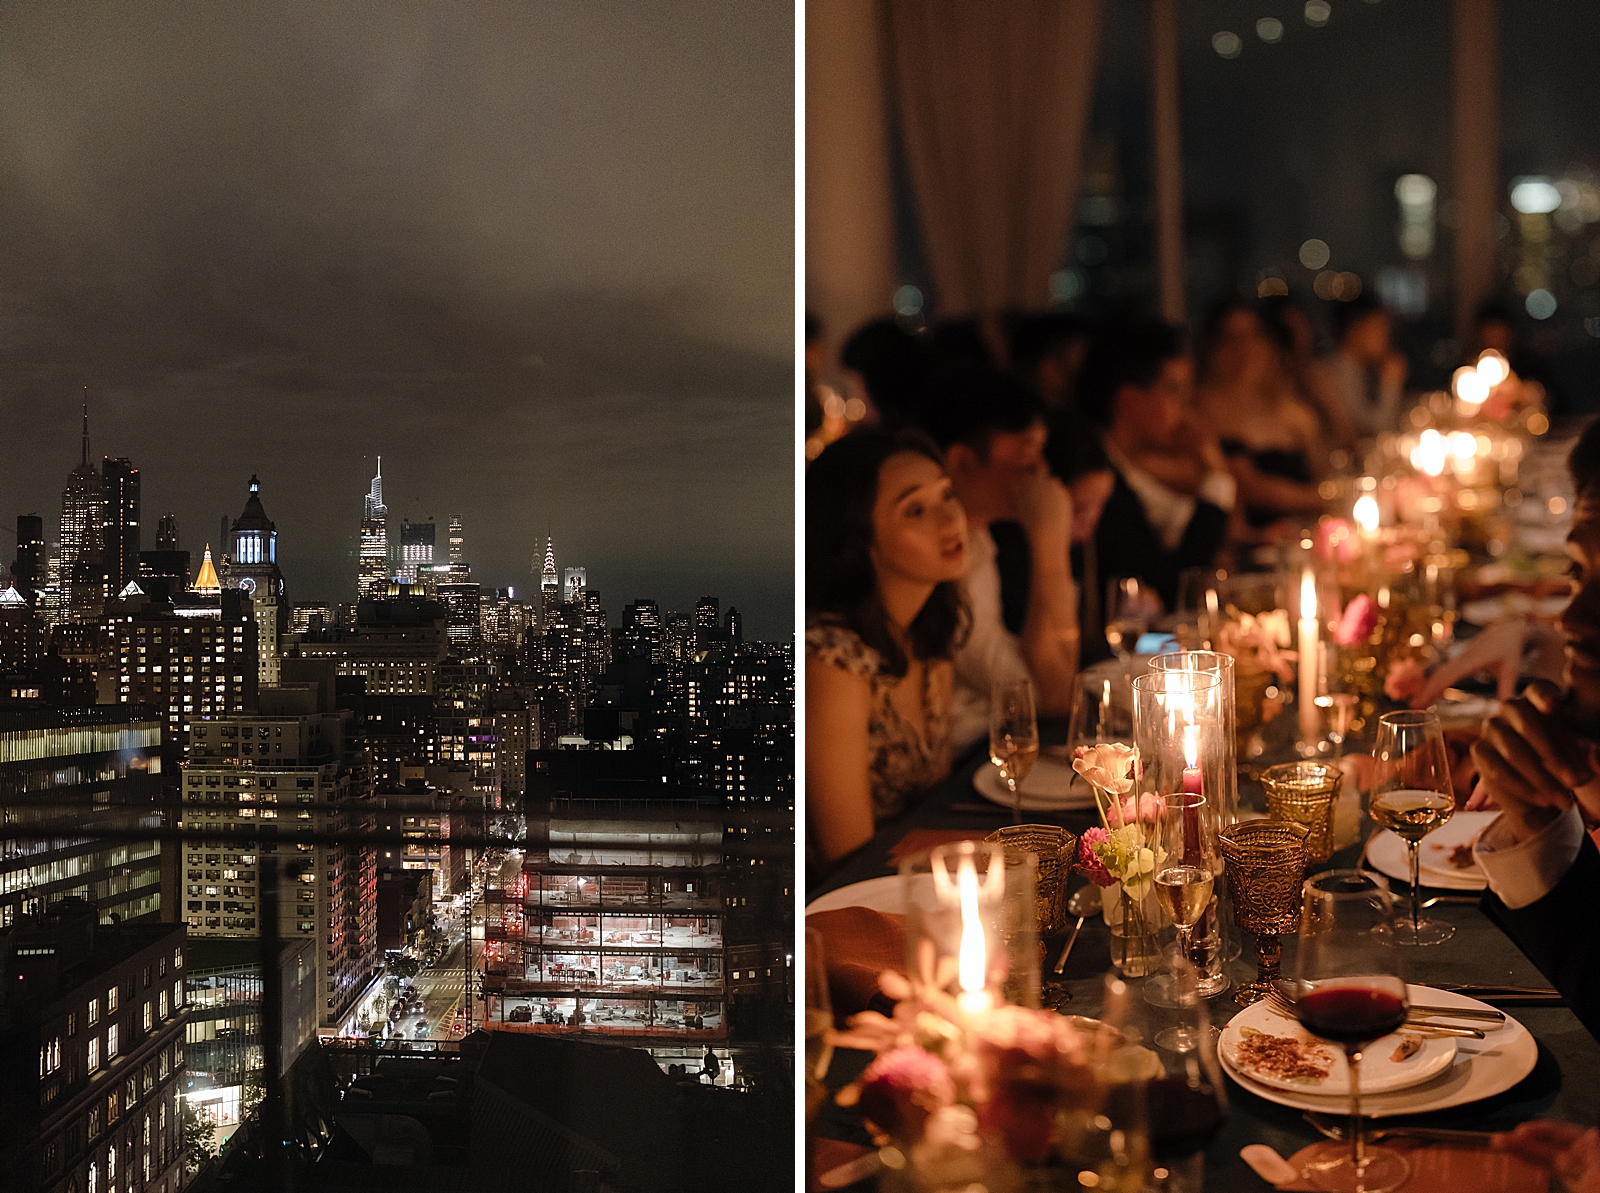 Left photo: Nighttime shot of the New York City skyline.
Right photo: Shot of the wedding guests sitting down for a candlelit dinner. 